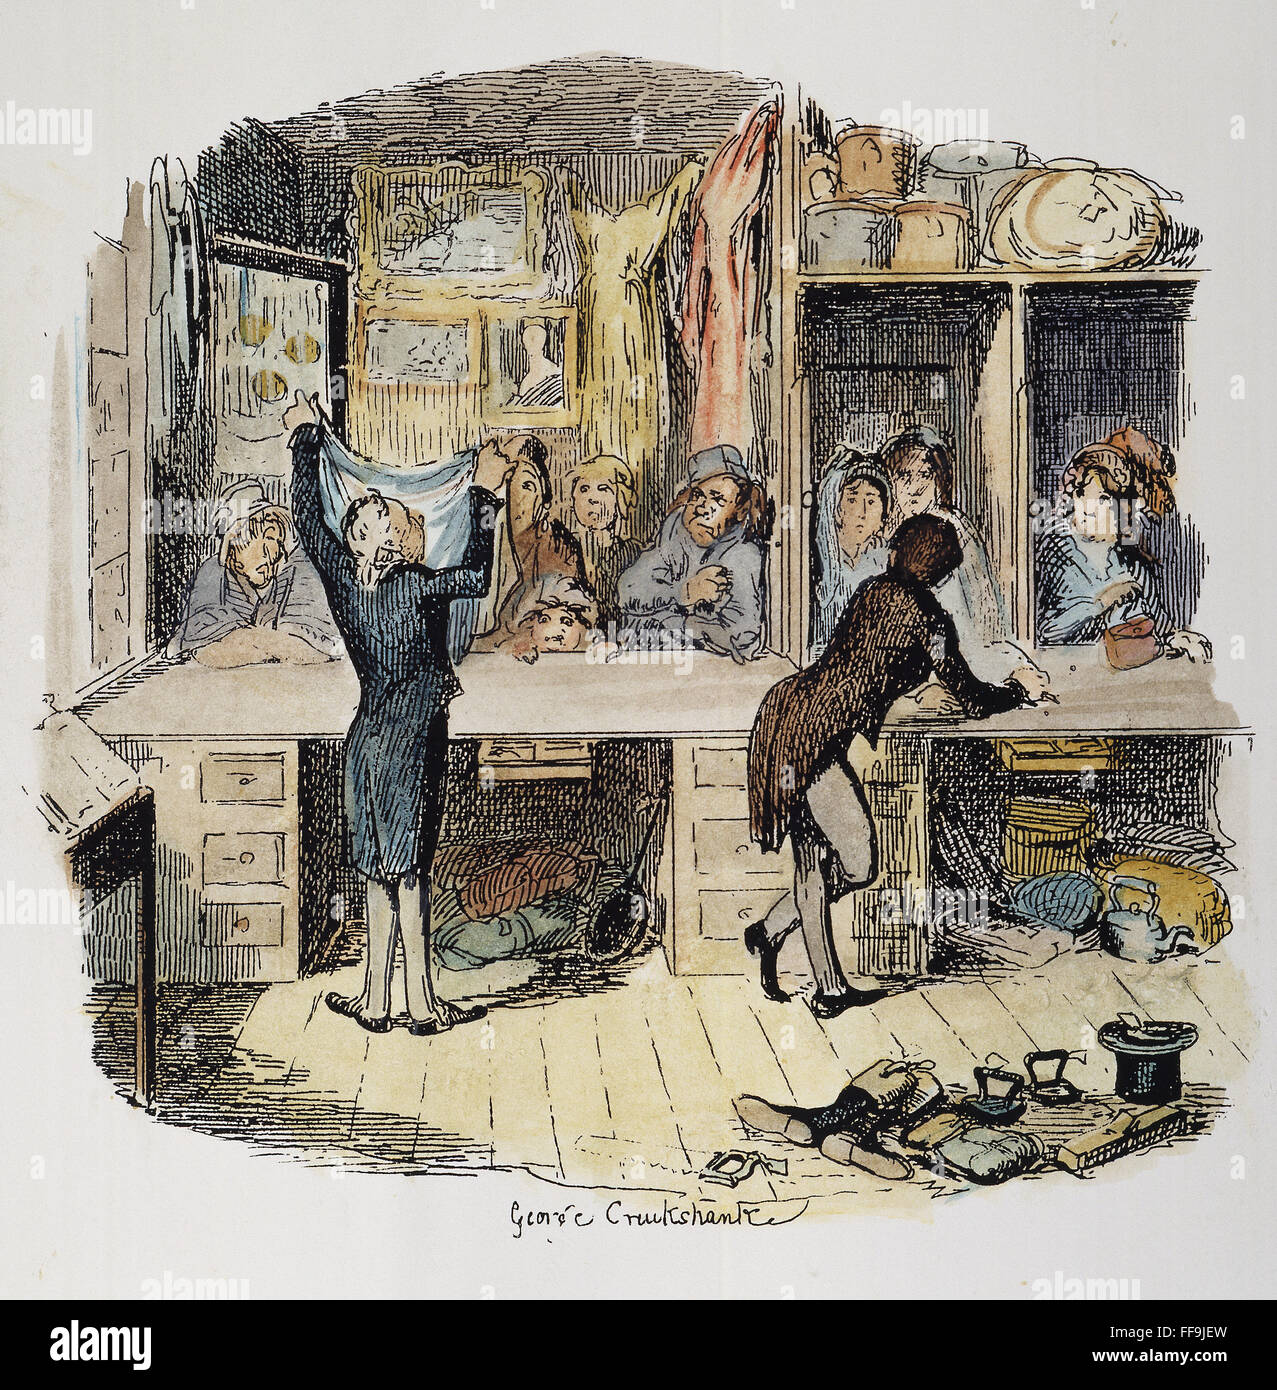 DICKENS: SKETCHES. /nThe Pawnbroker's Shop. Etching by George Cruikshank, 1836-37, to Charles Dickens' 'Sketches by Boz.' Stock Photo